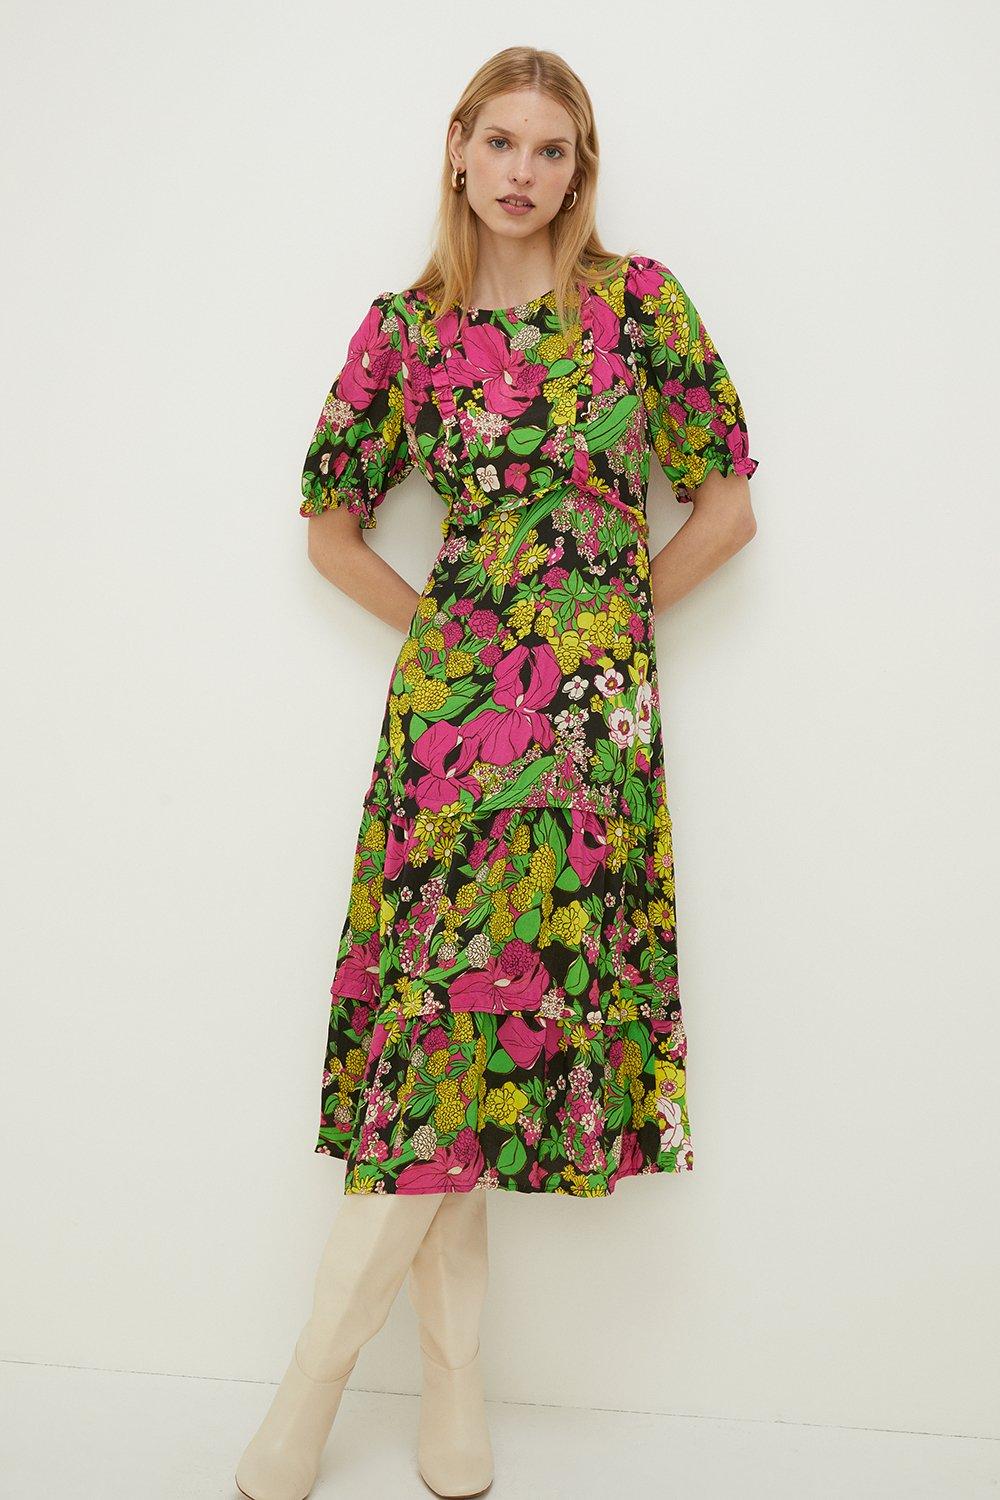 Petite Frill Ruffle Colourful Floral Dress